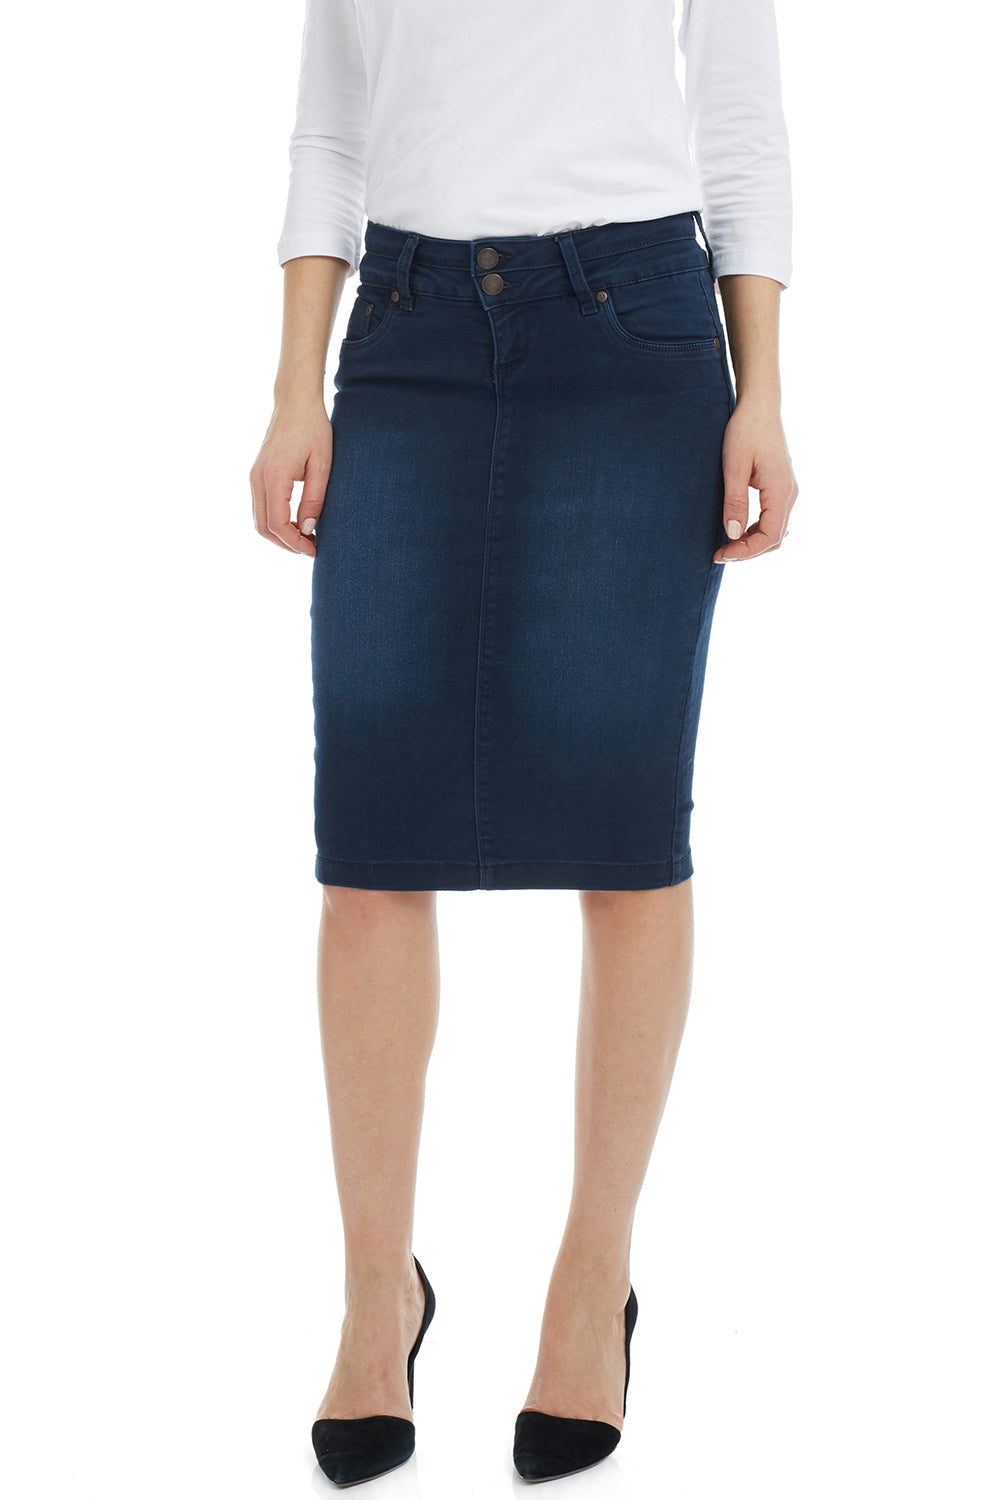 tznius blue denim pencil skirt for women with pockets and belt loops